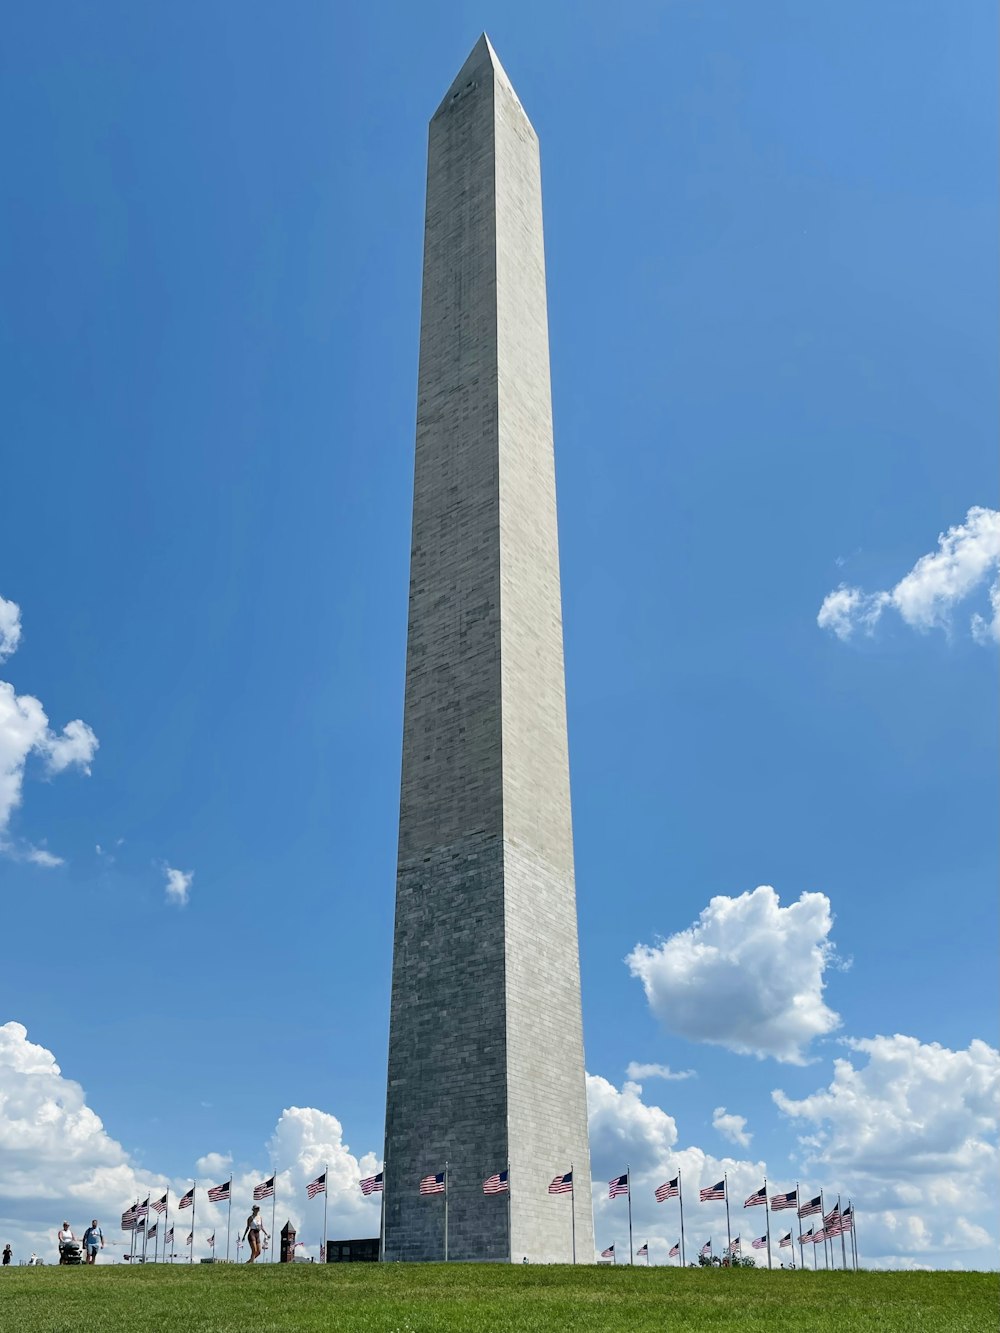 the washington monument is surrounded by american flags